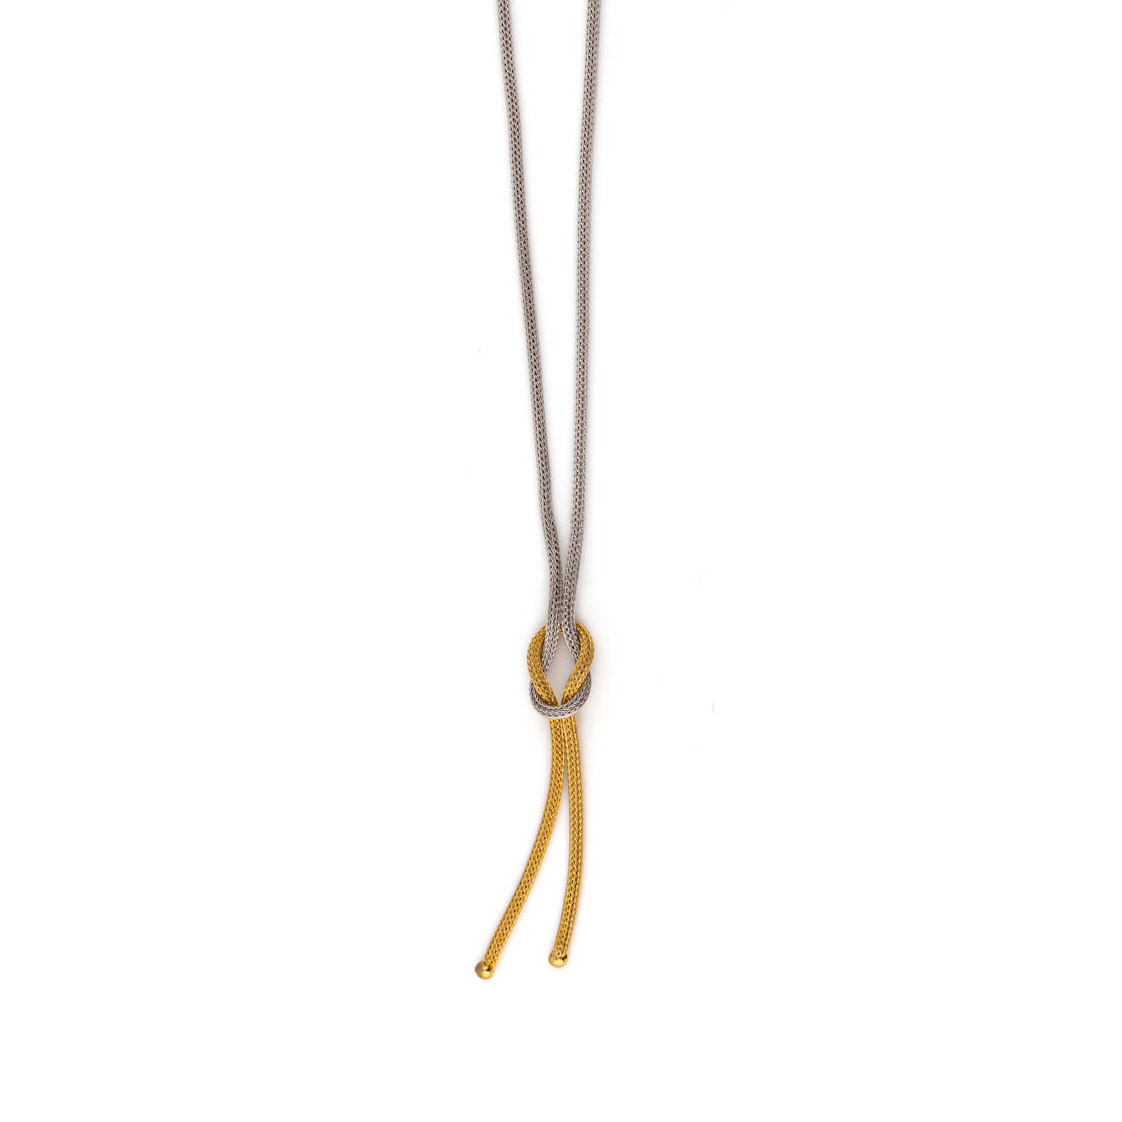 Knot Chain Necklace - Gold Plated Silver 925